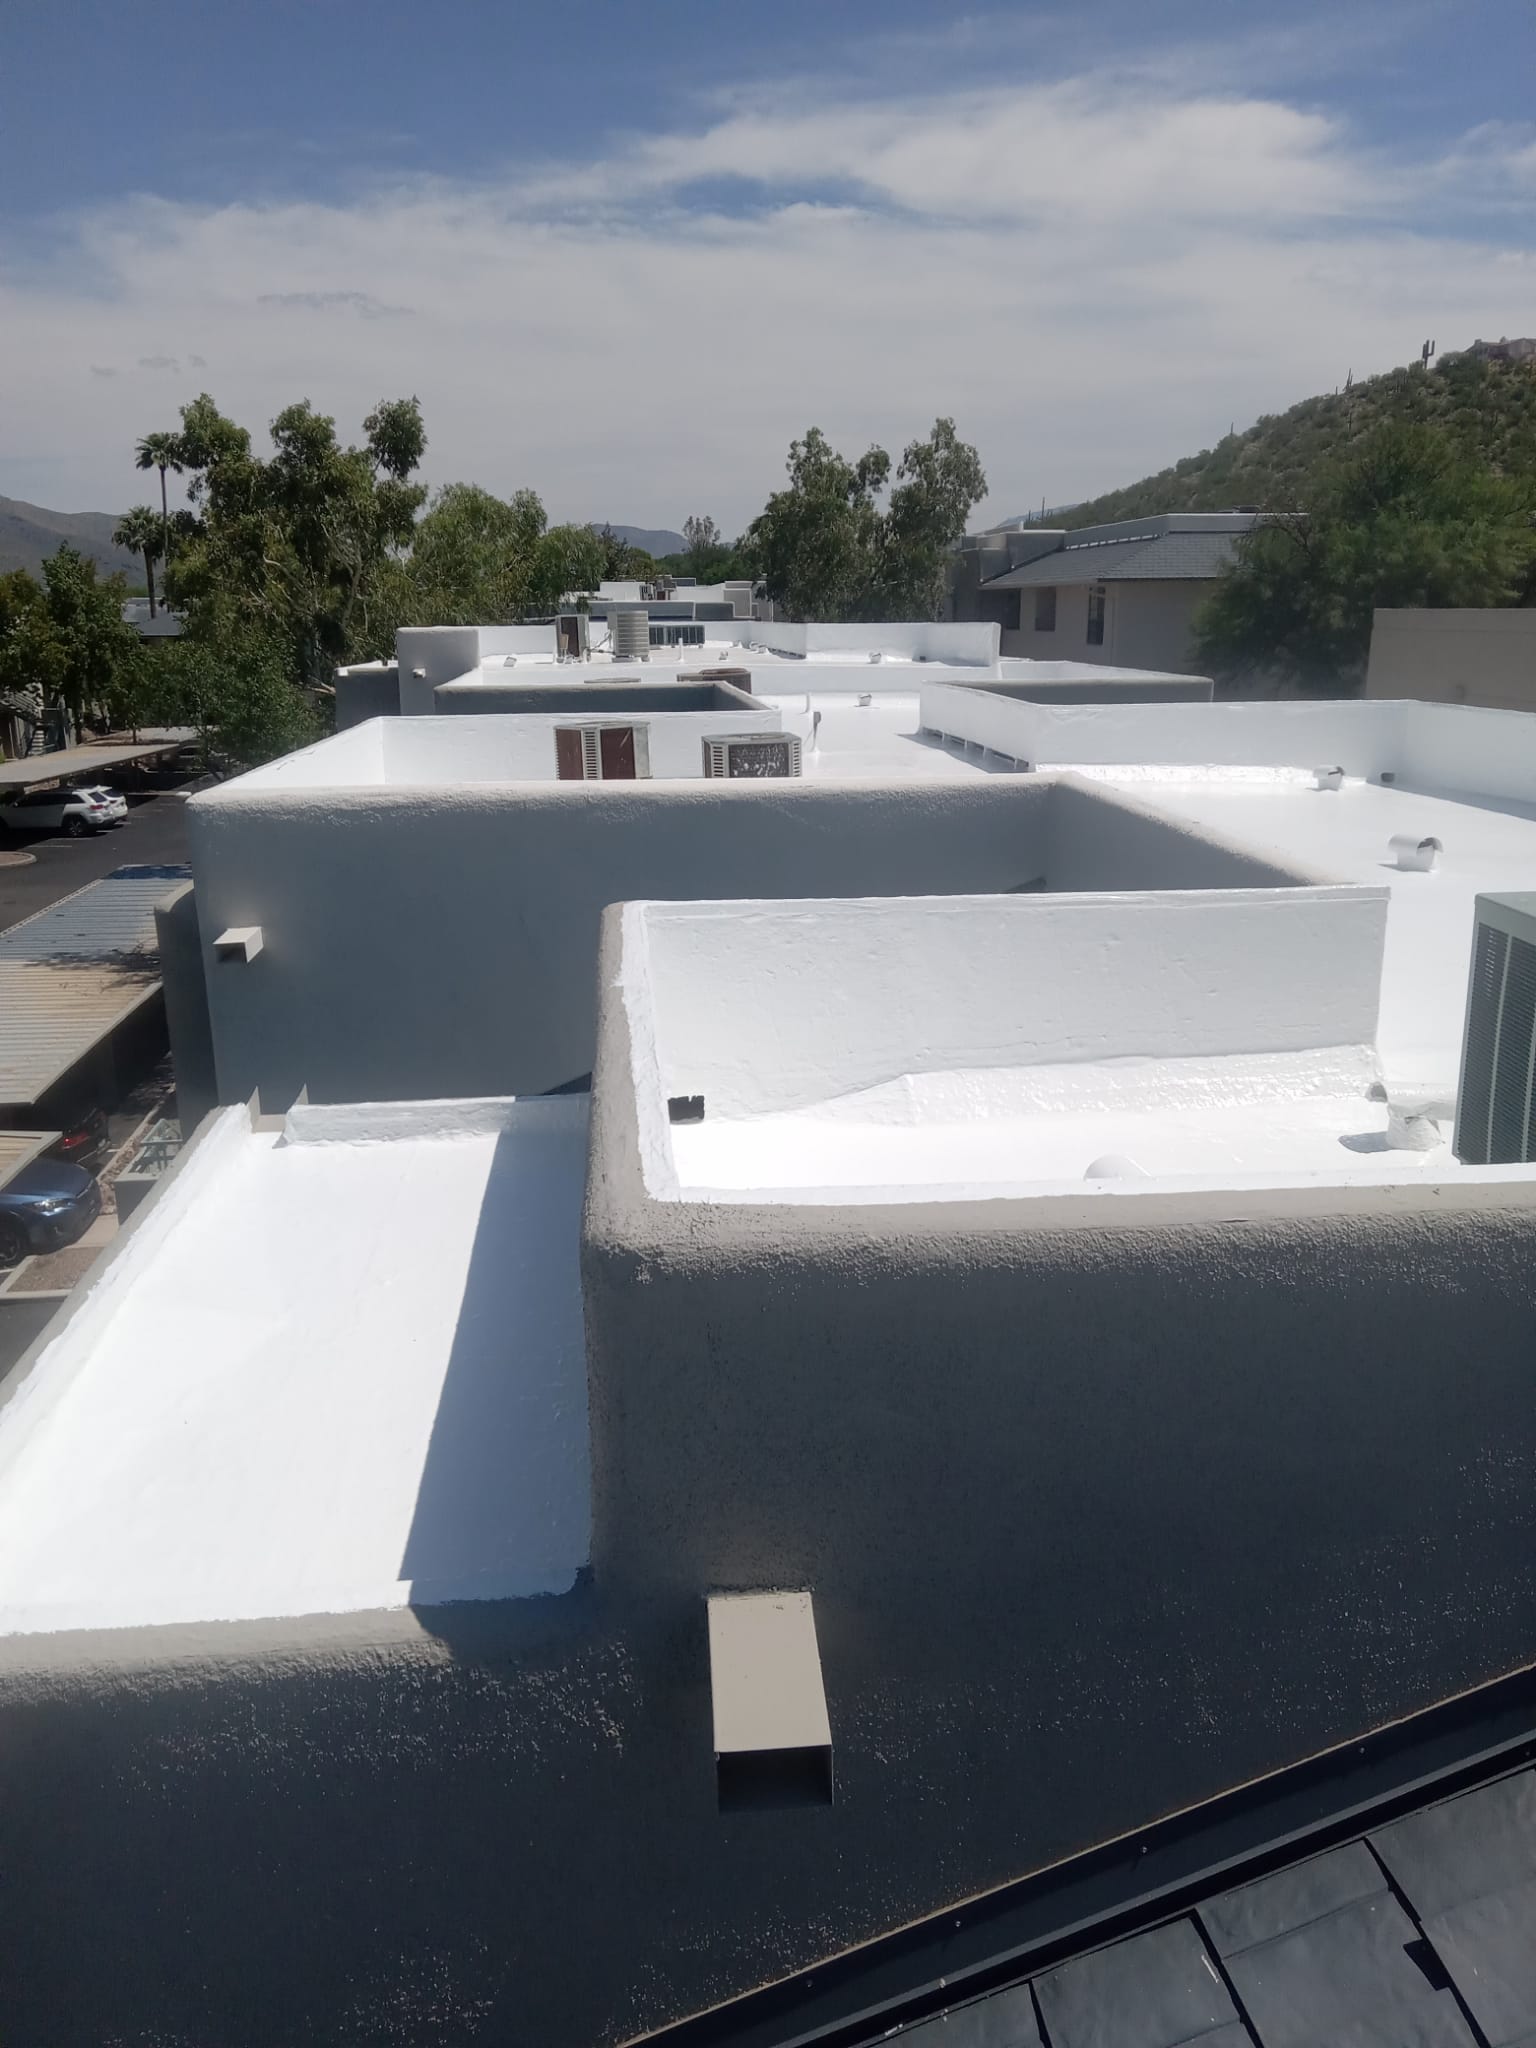 Immaculate white spray foam coating on a Mesa rooftop, showcasing the expansive, protective coverage against the elements.